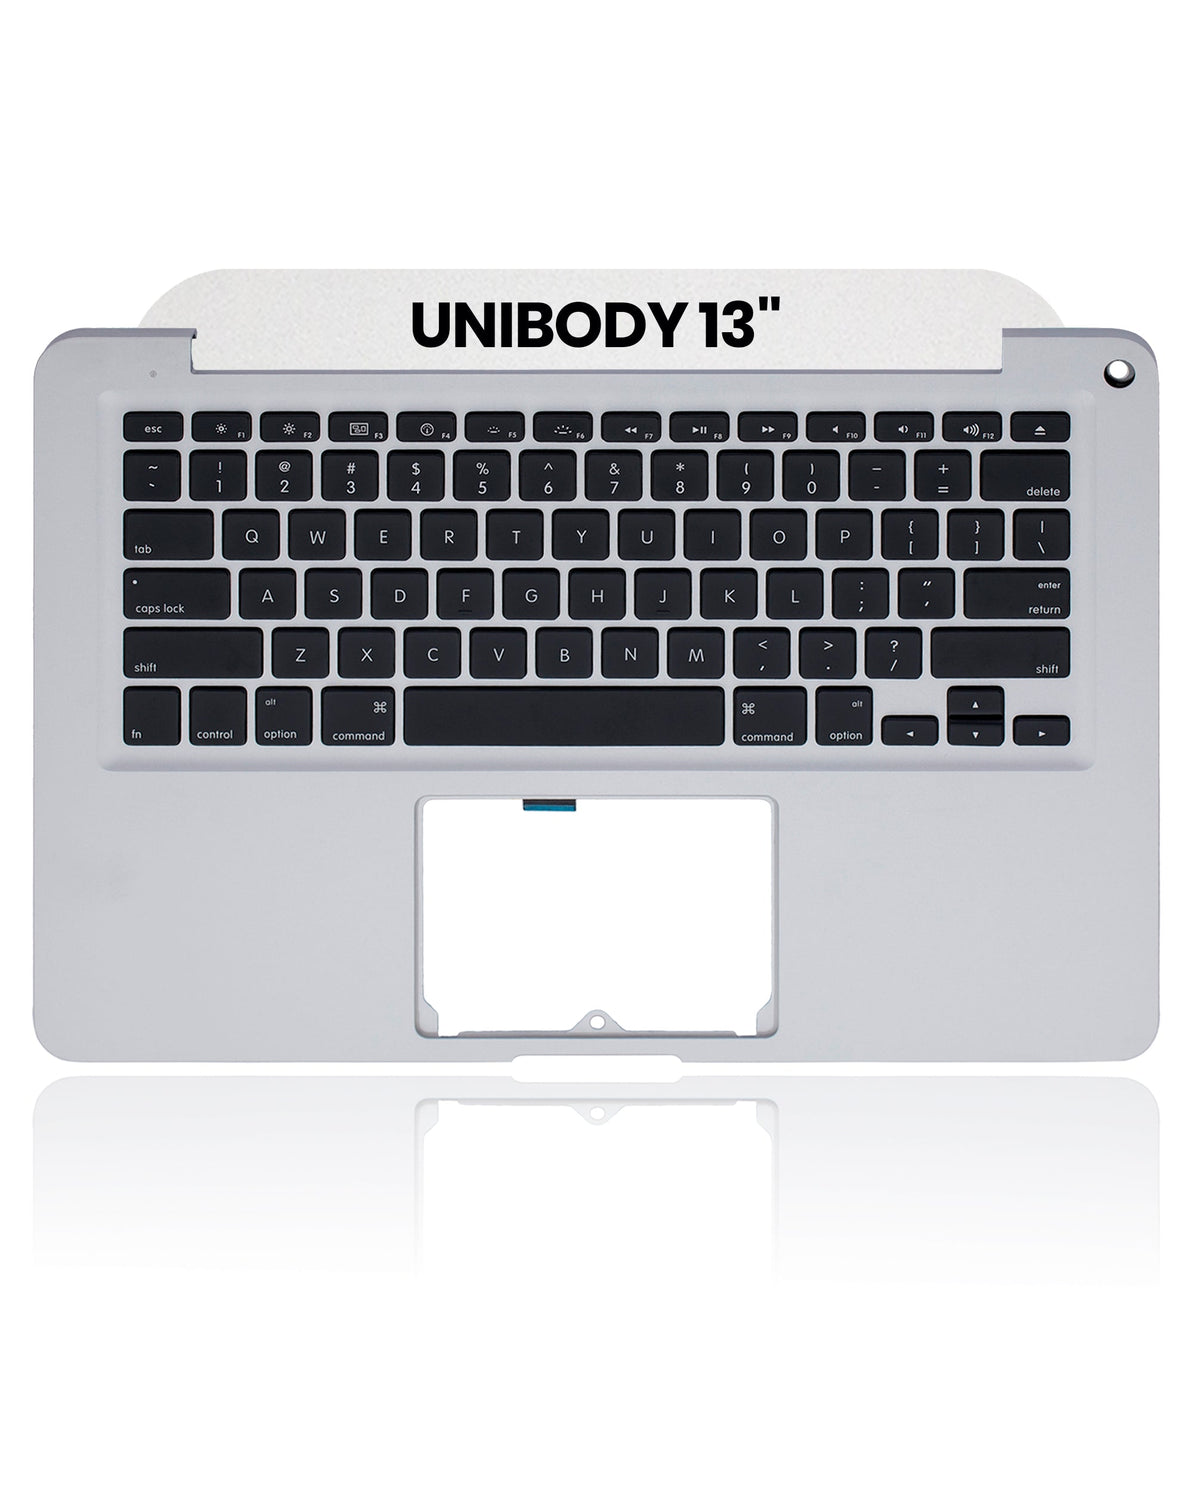 TOP CASE WITH KEYBOARD (US ENGLISH) FOR MACBOOK UNIBODY 13" A1278 (LATE 2008)  (USED OEM PULL: COSMETIC GRADE: NEW)